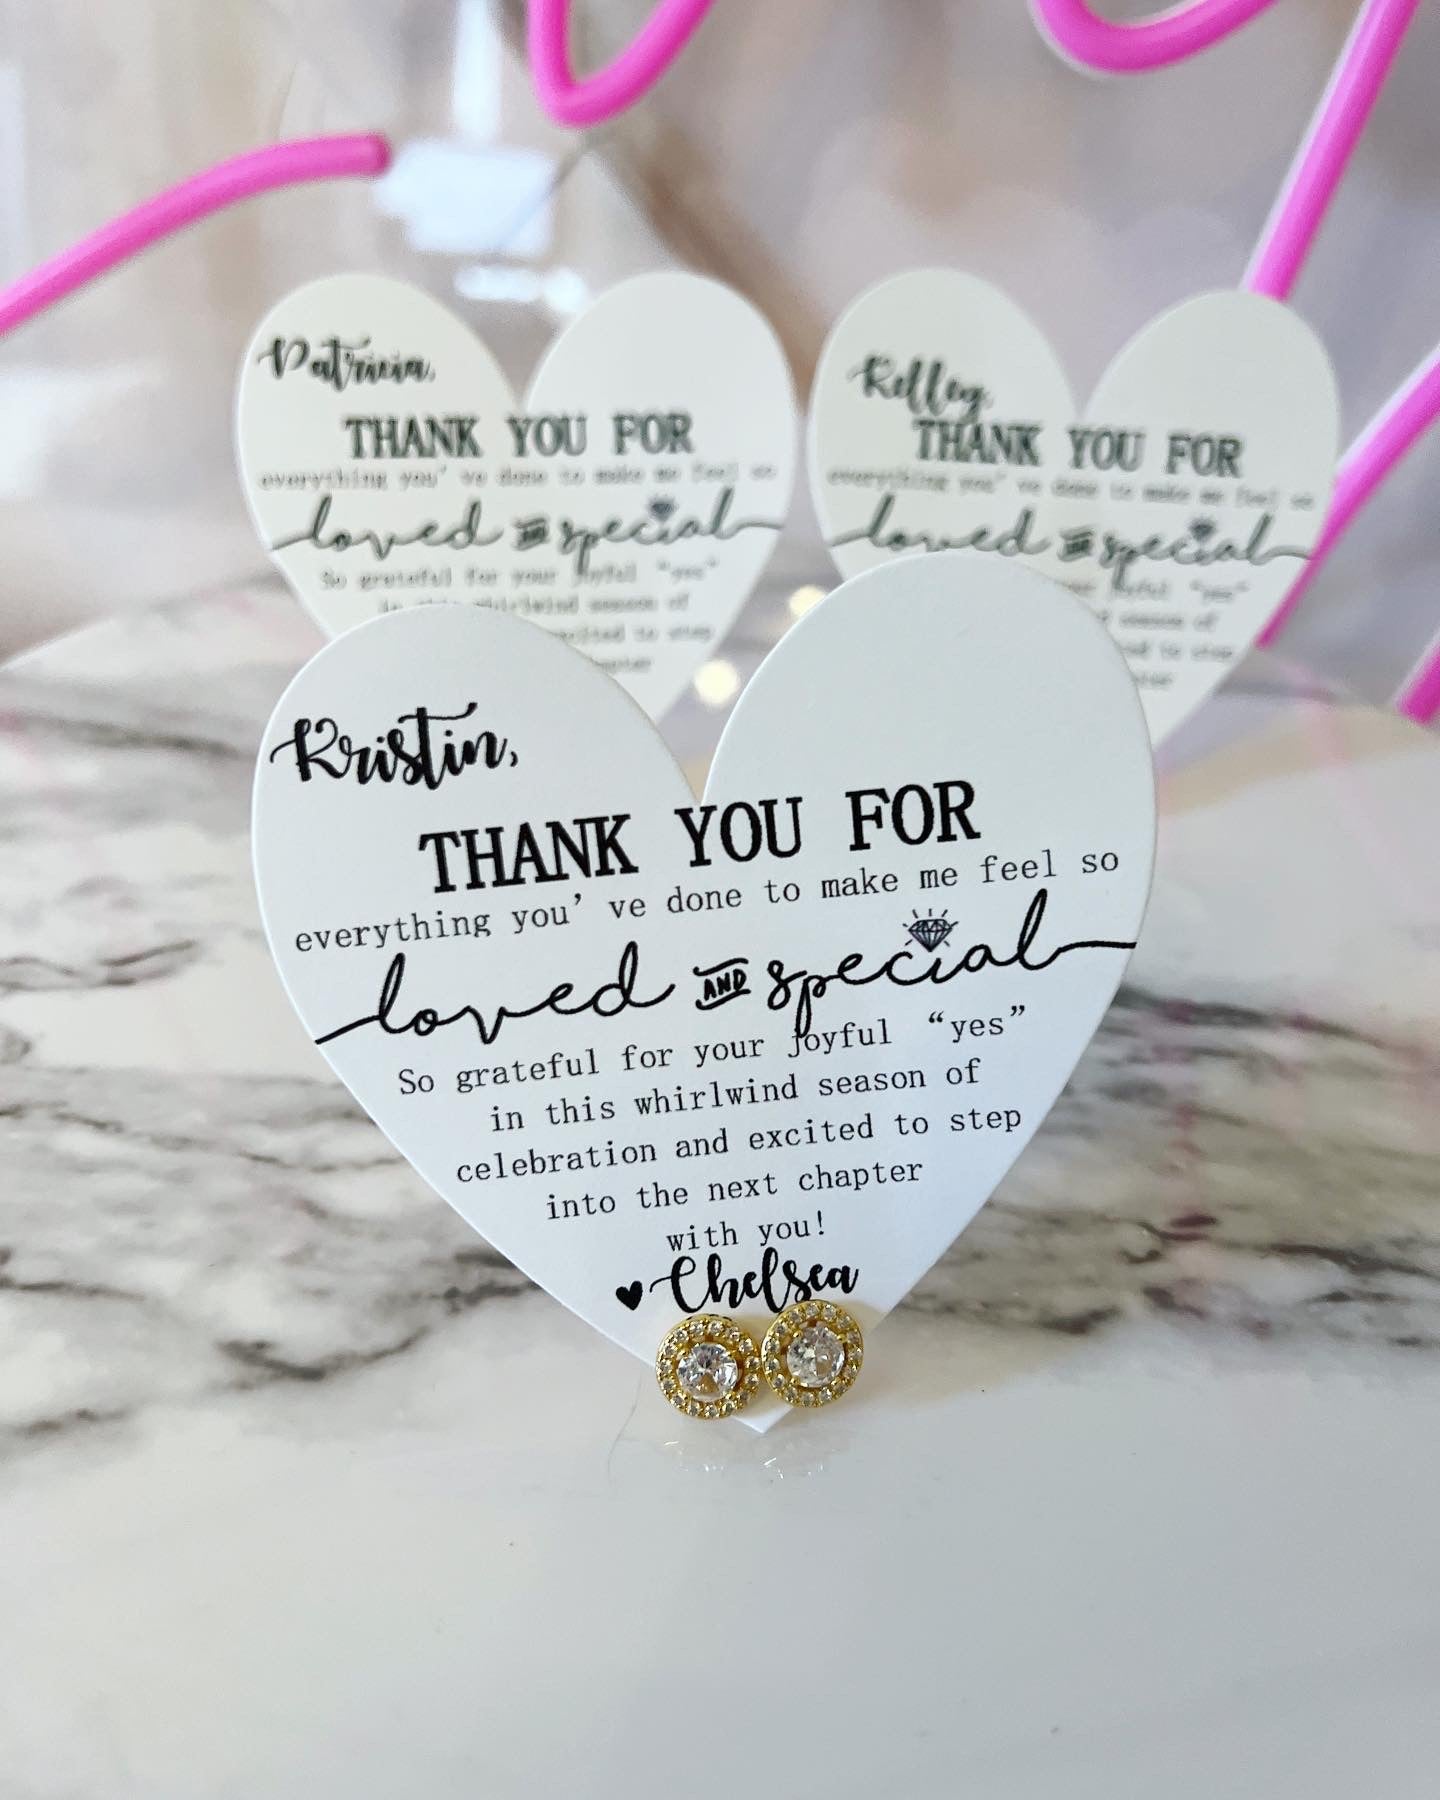 Loved and Special Bridal party earrings House Party